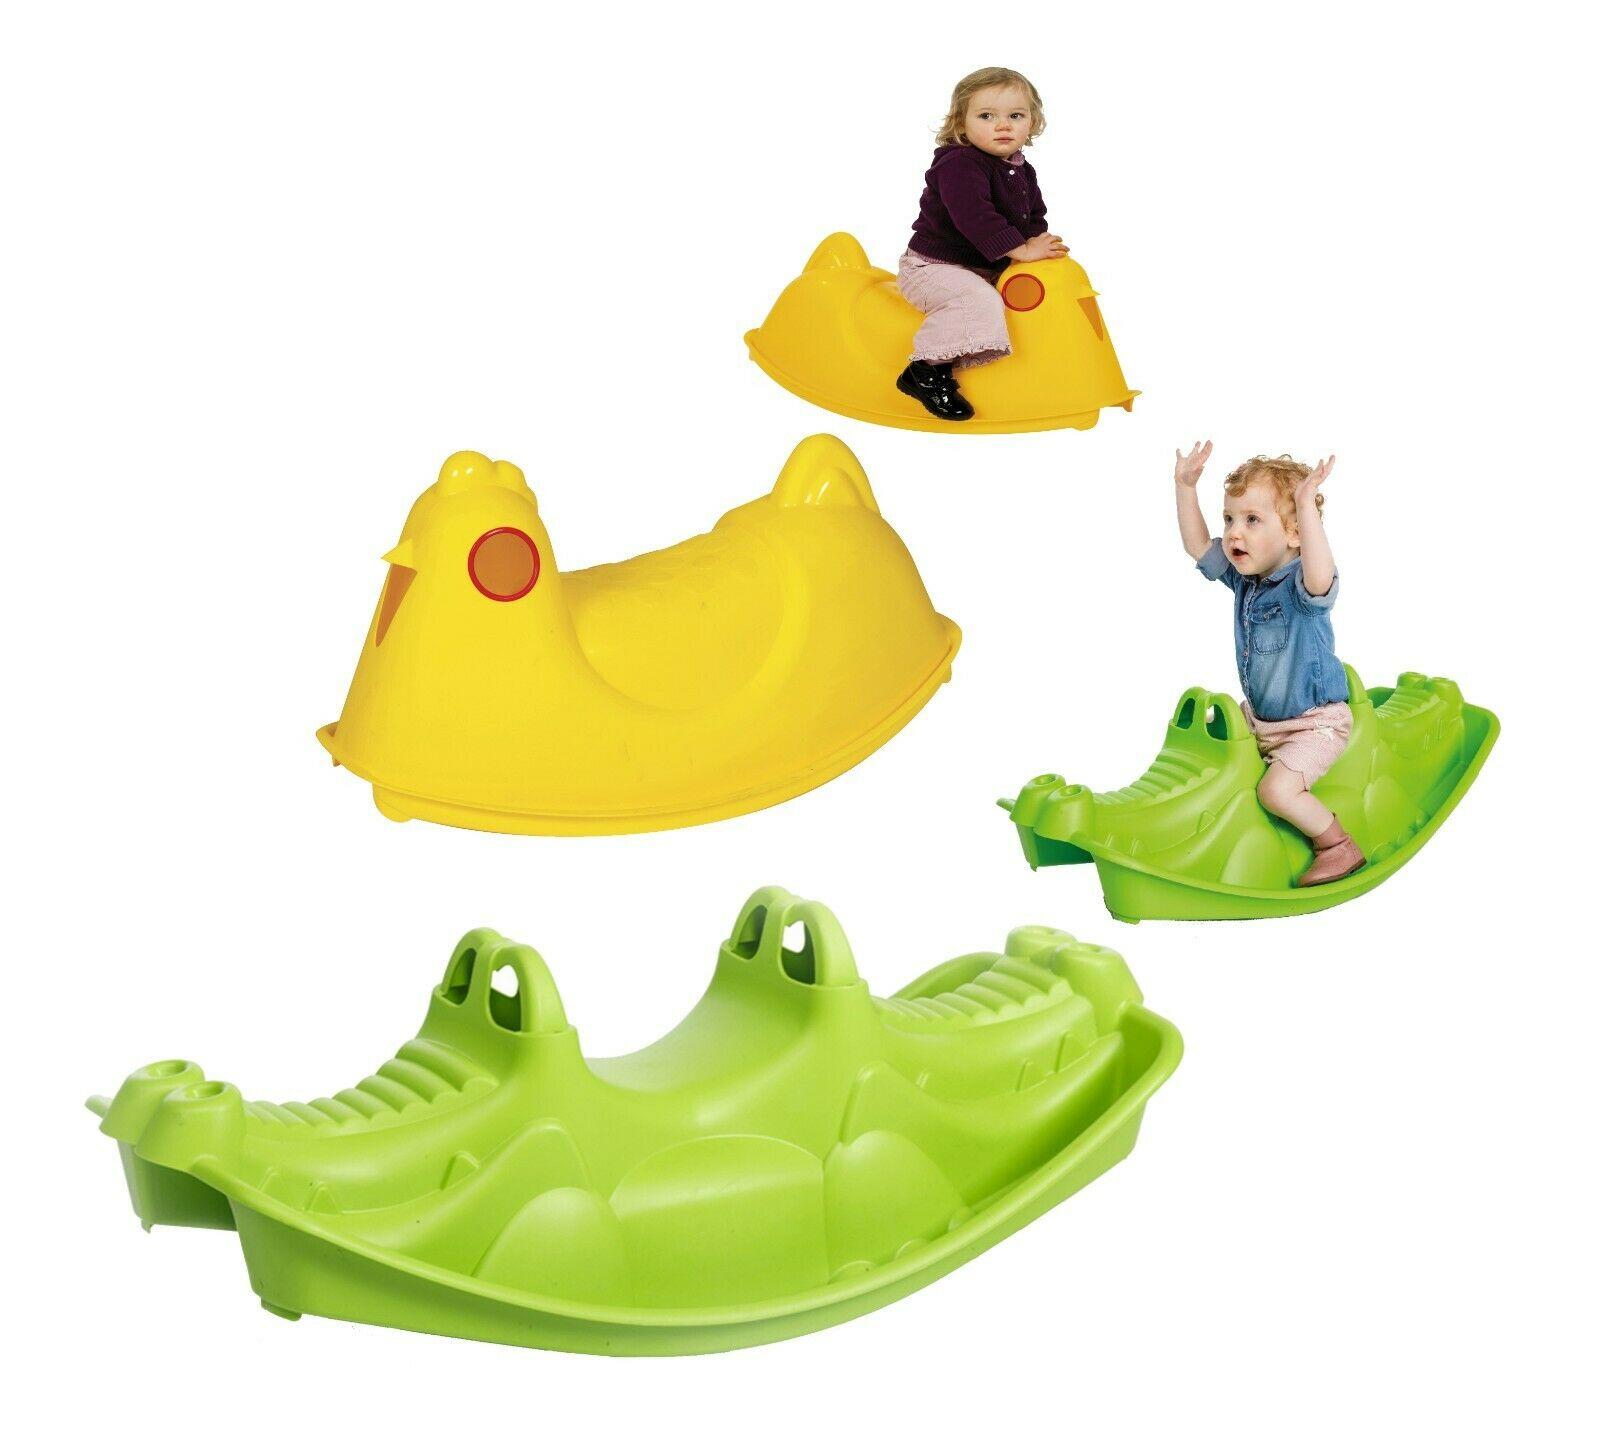 Durable Plastic With 3 Seats Green Crocodile 3 x Persons Rocker And Seesaw 